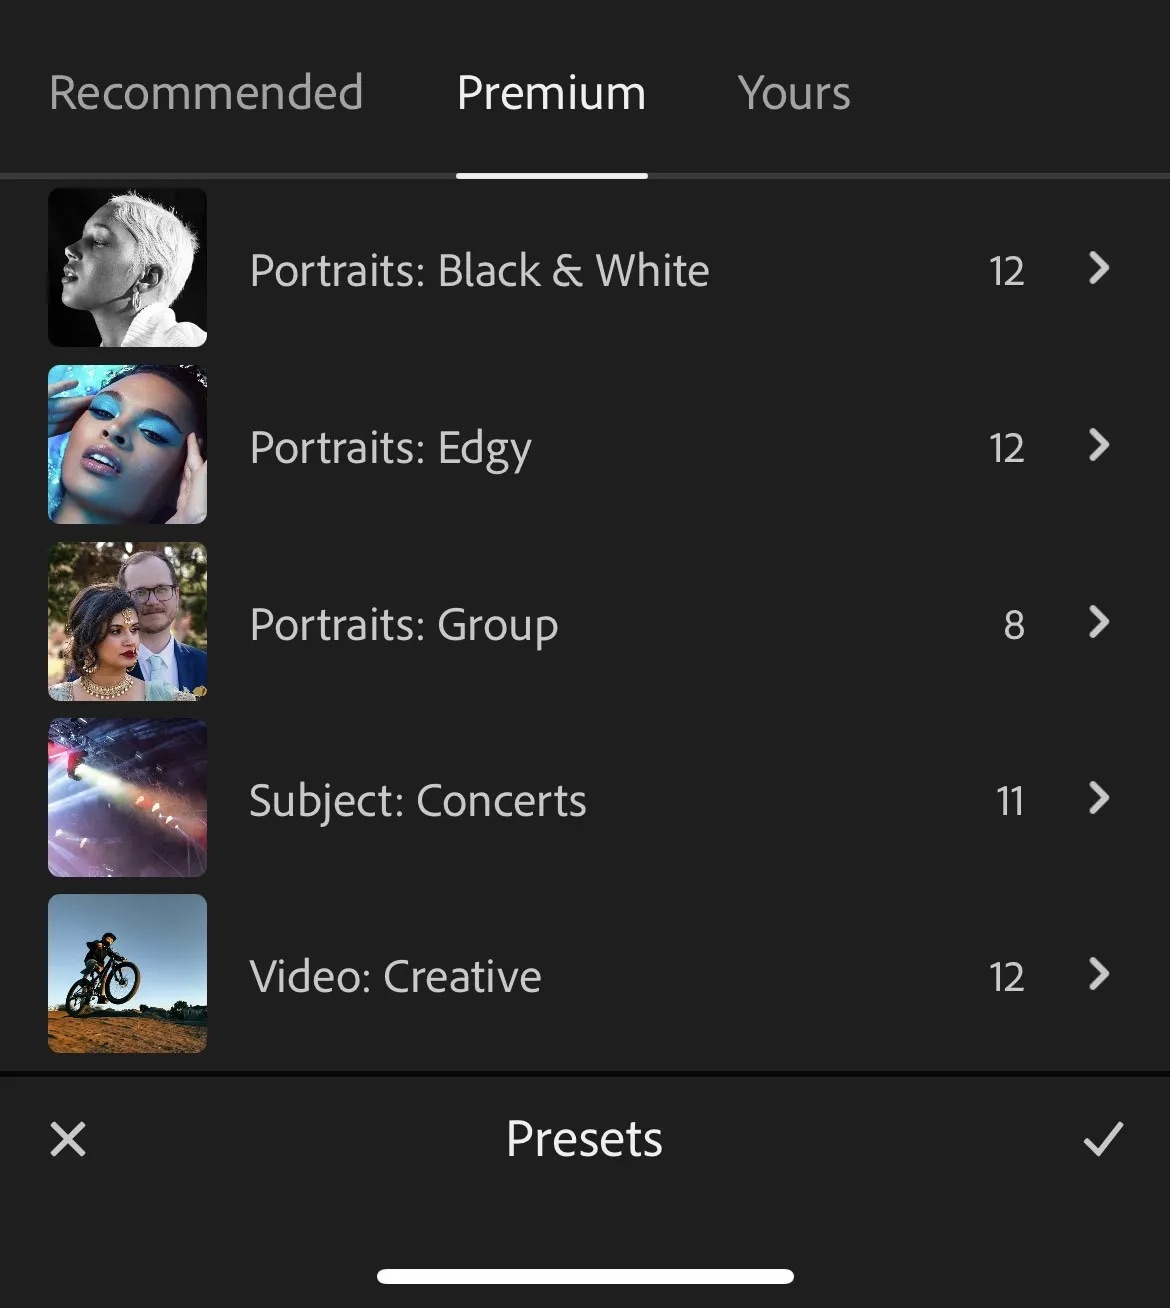 Adobe Lightroom Gets Support for Video, Adaptive Presets, Compare View, More